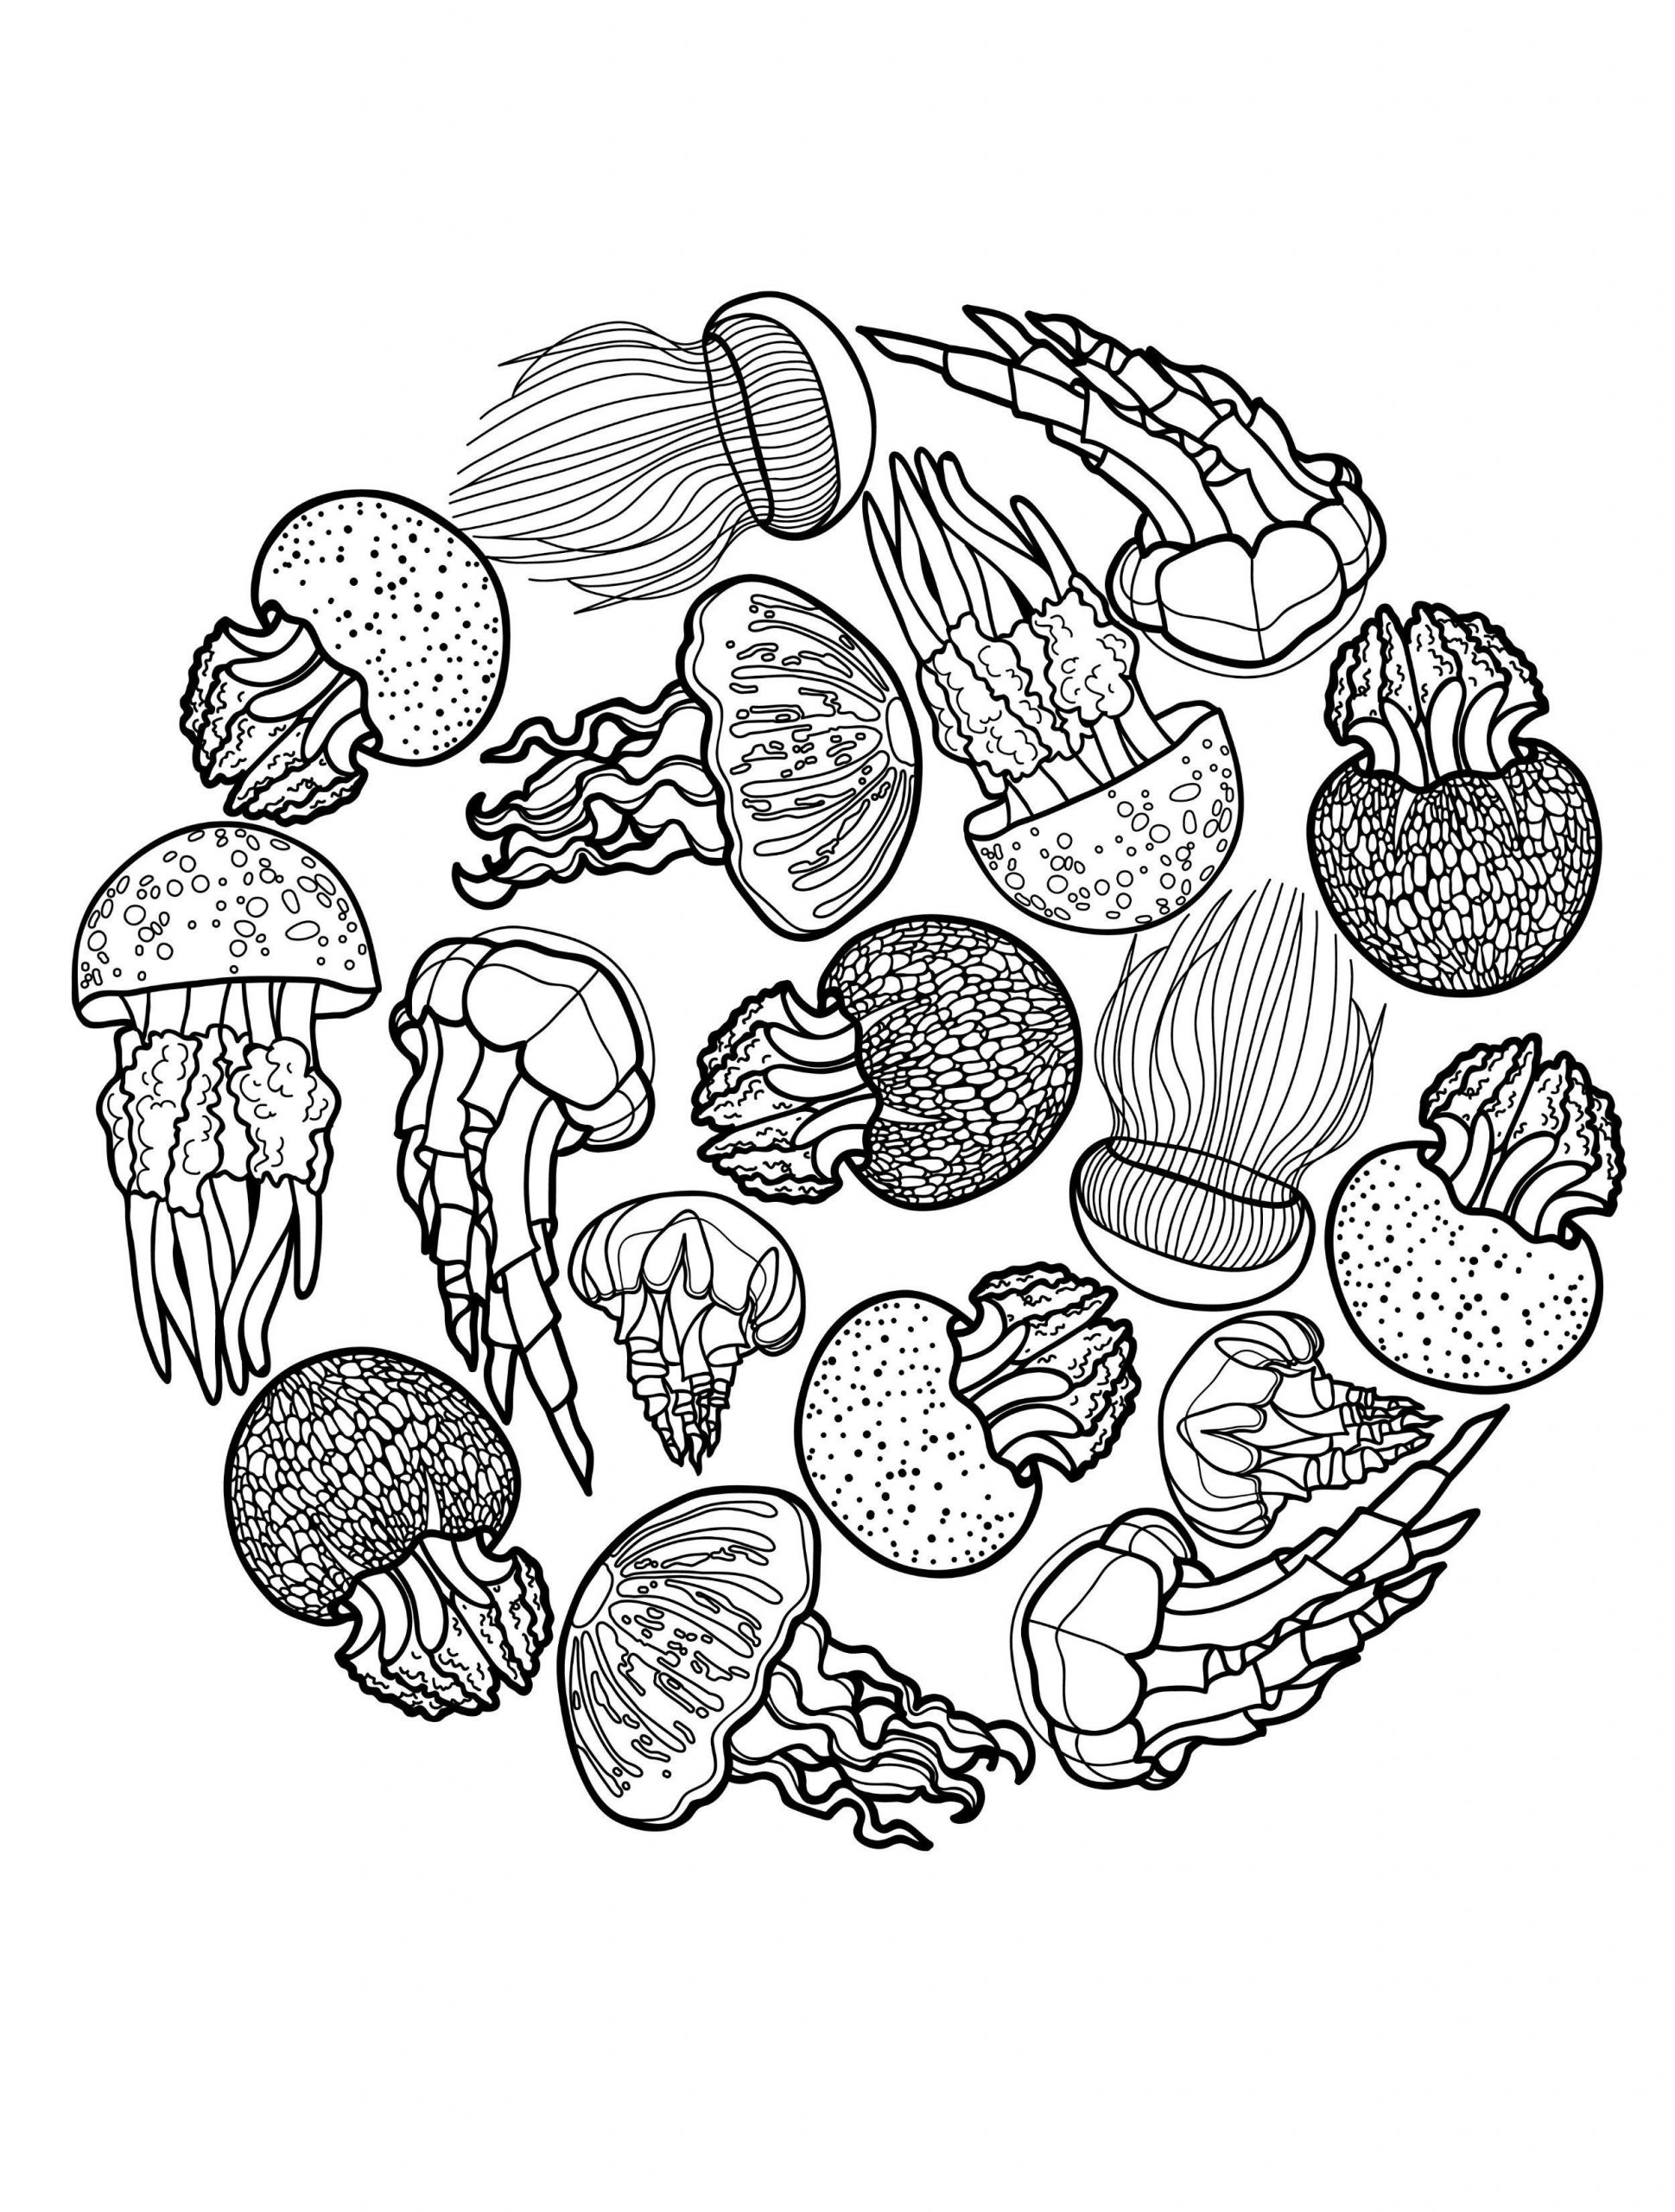 Jellyfish Coloring Pages For Adults
 23 Free Printable Insect & Animal Adult Coloring Pages